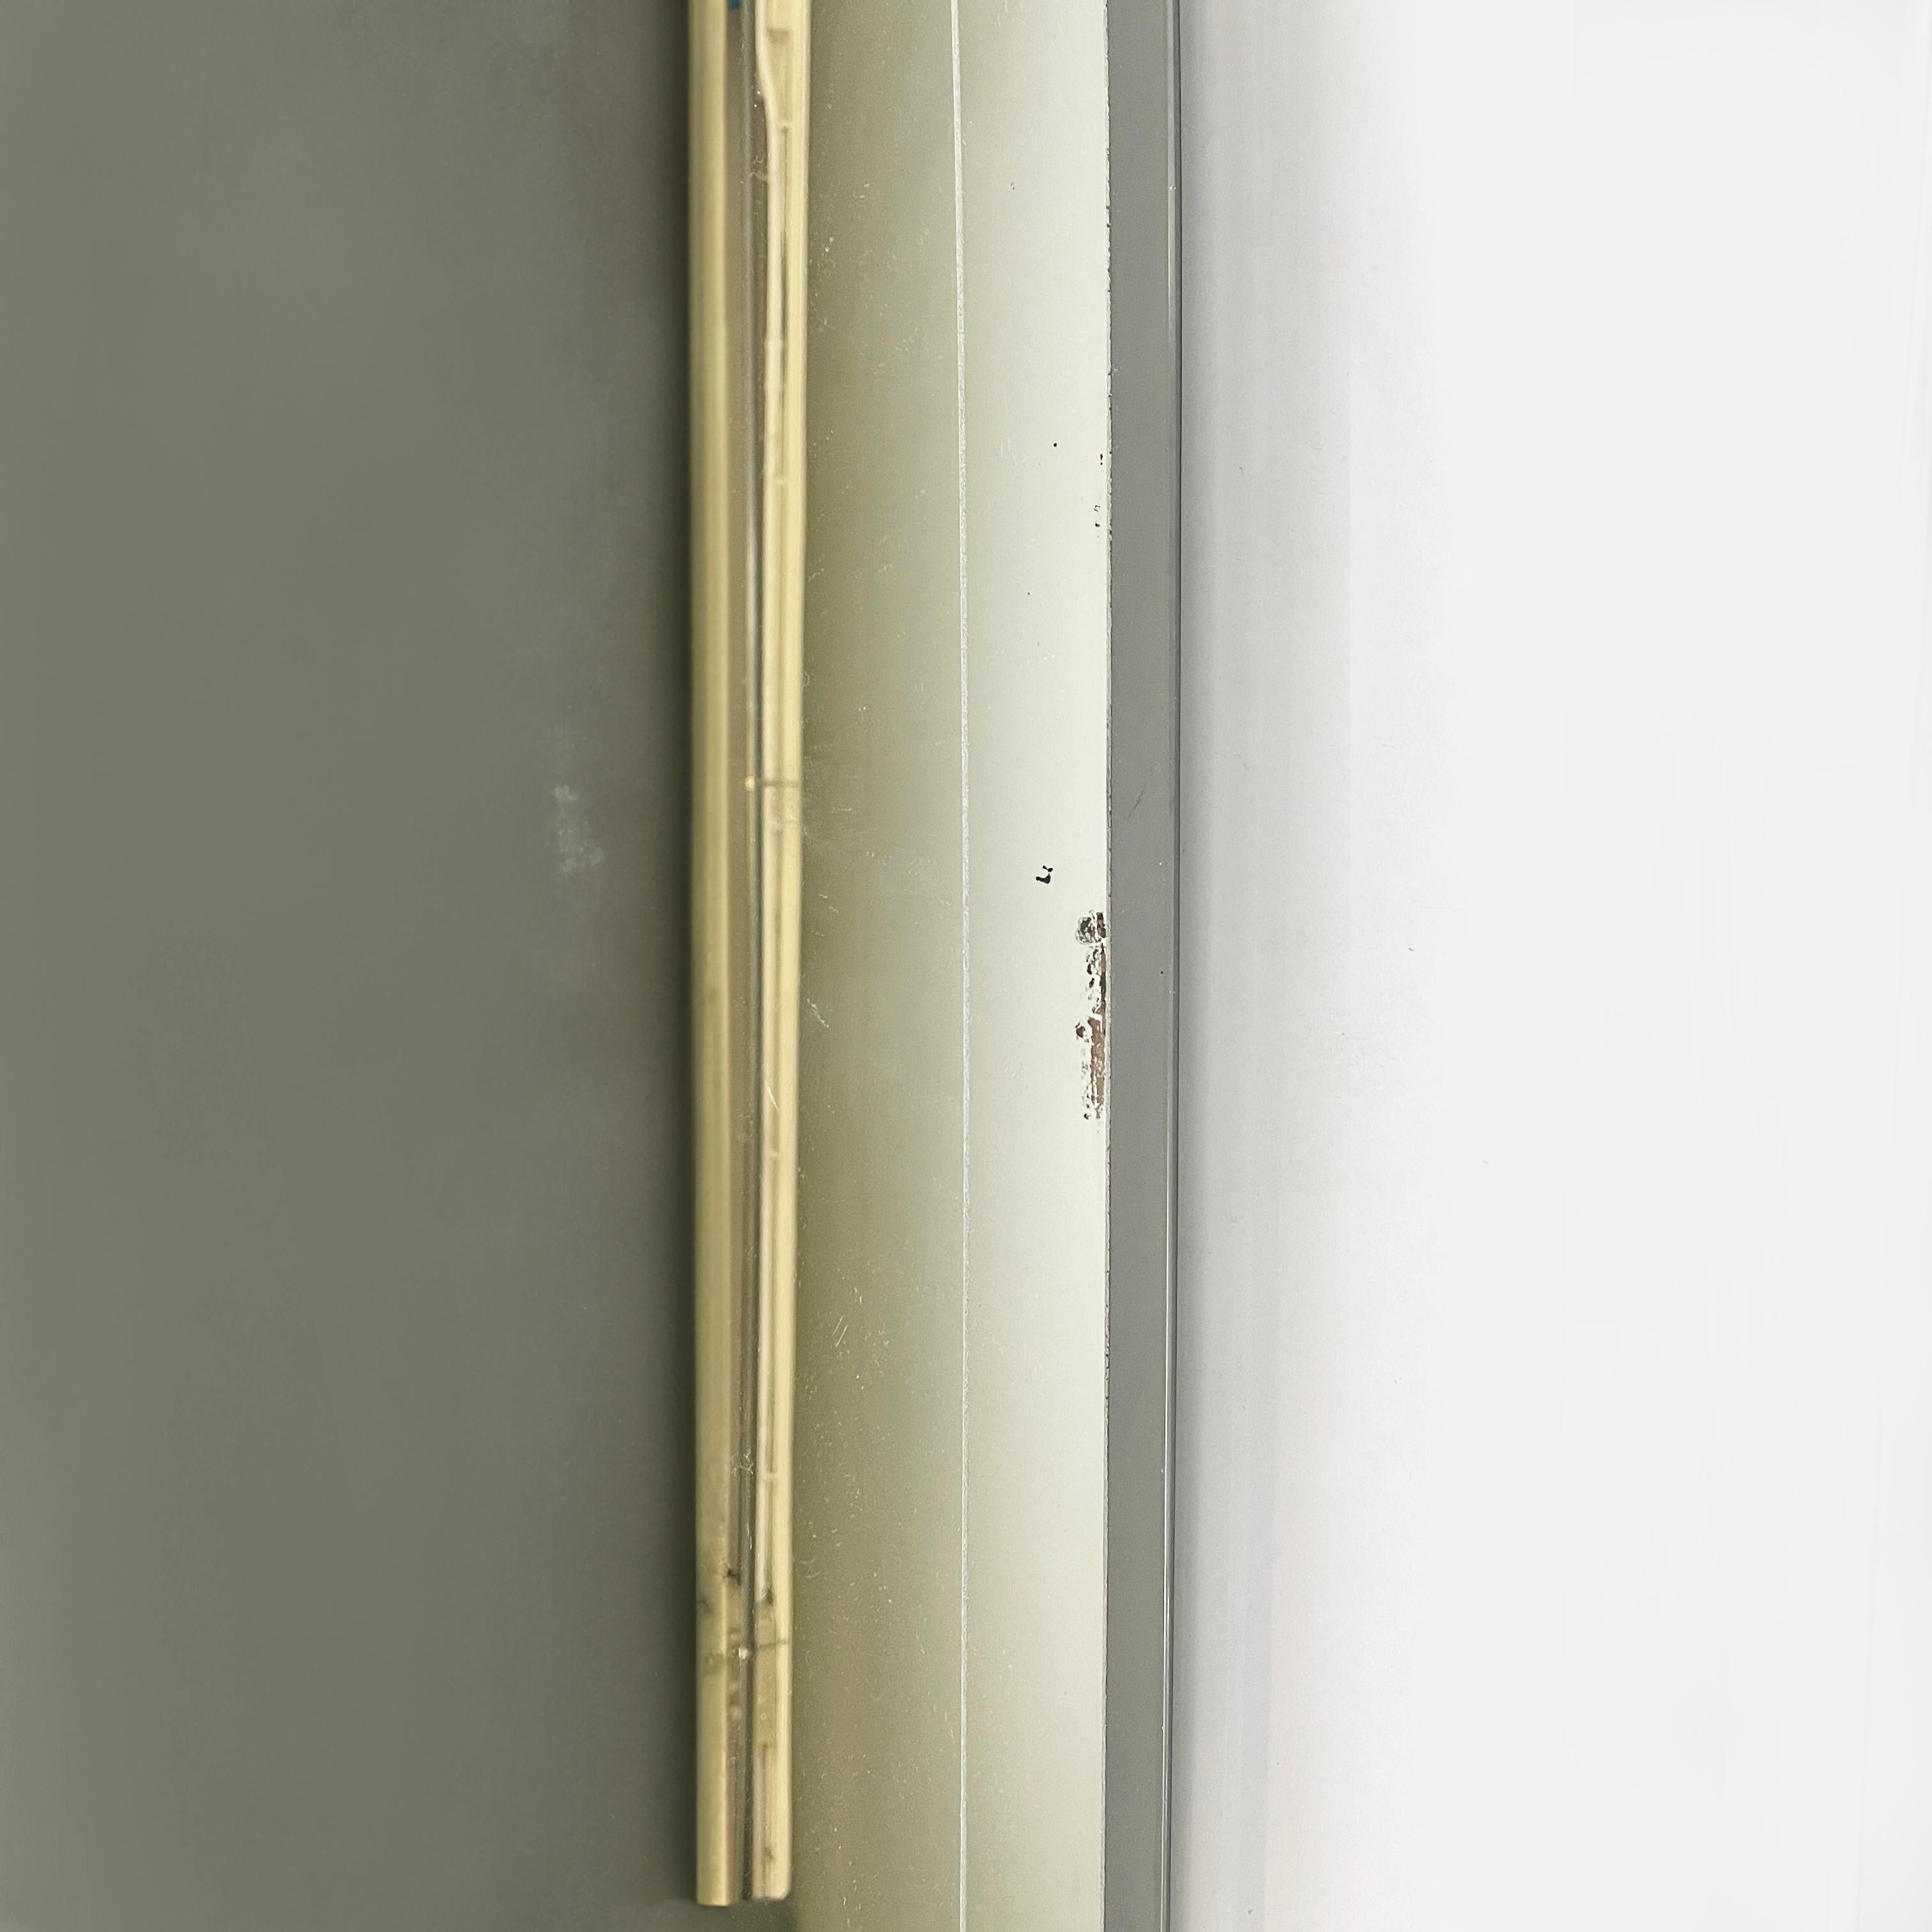 Italian art deco Full-length wall mirror with brass and glass details, 1940s For Sale 1